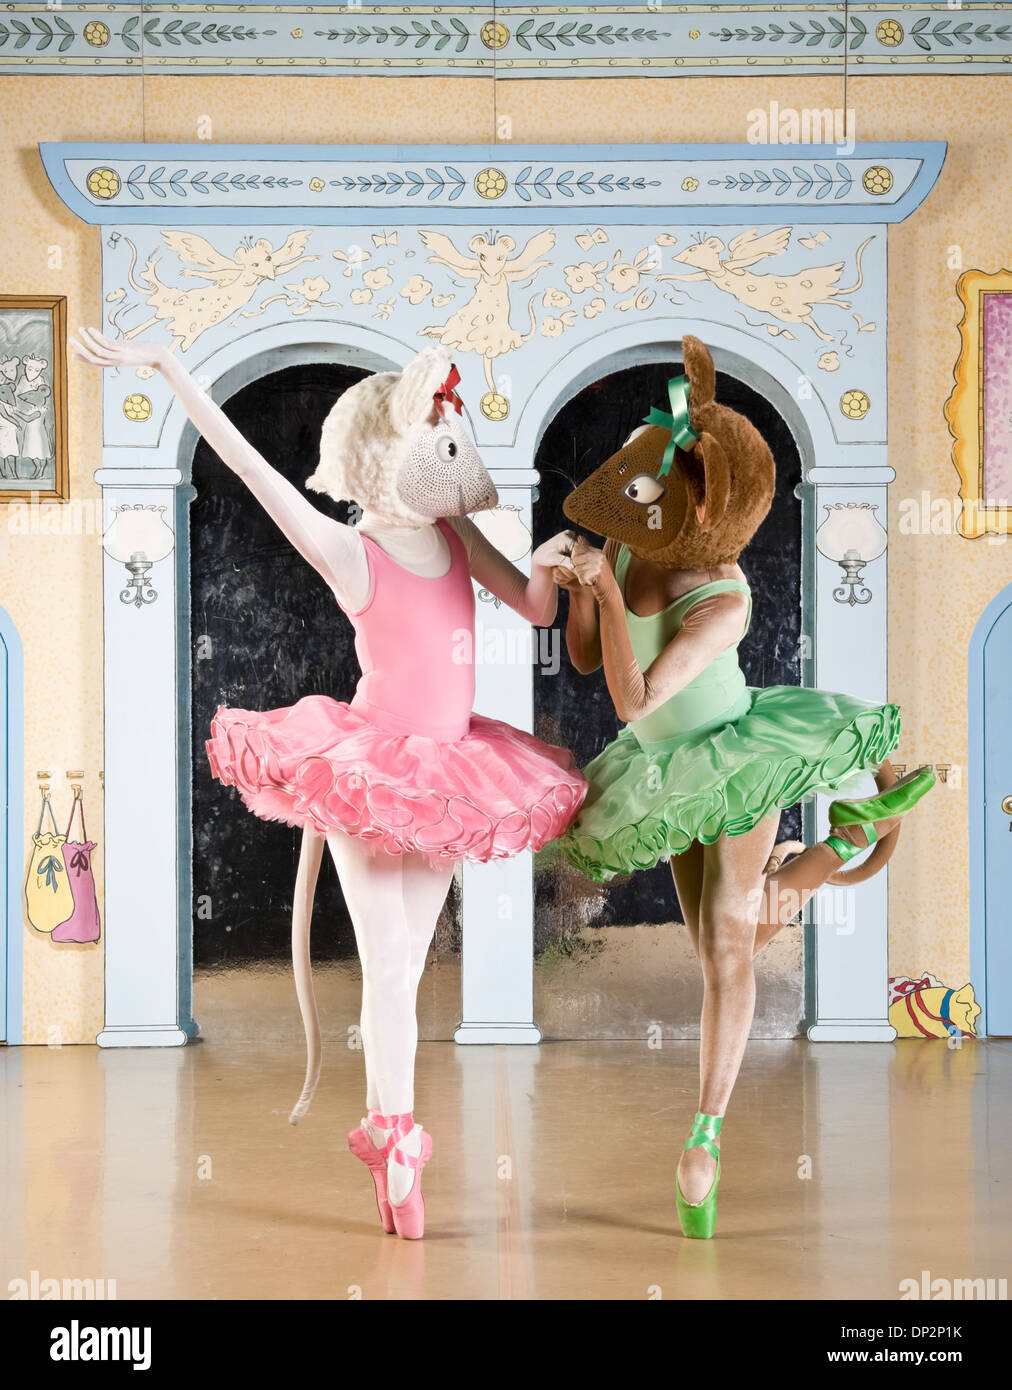 Angelina Ballerina and friend en pointe photographed on stage Stock Photo -  Alamy